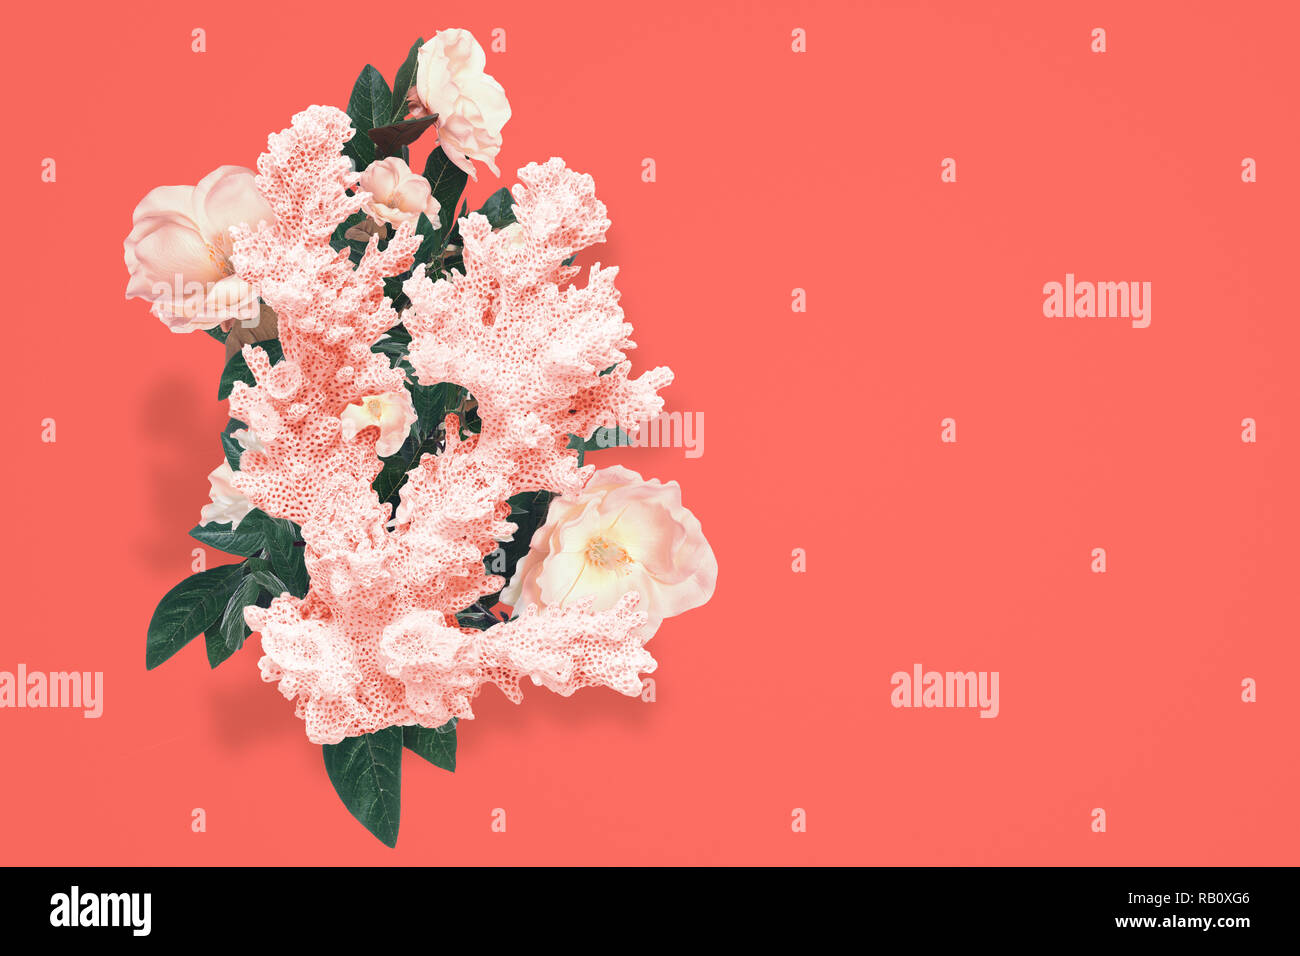 Abstract design of coral with flowers decor over trend of 2019 color trend living coral background Stock Photo